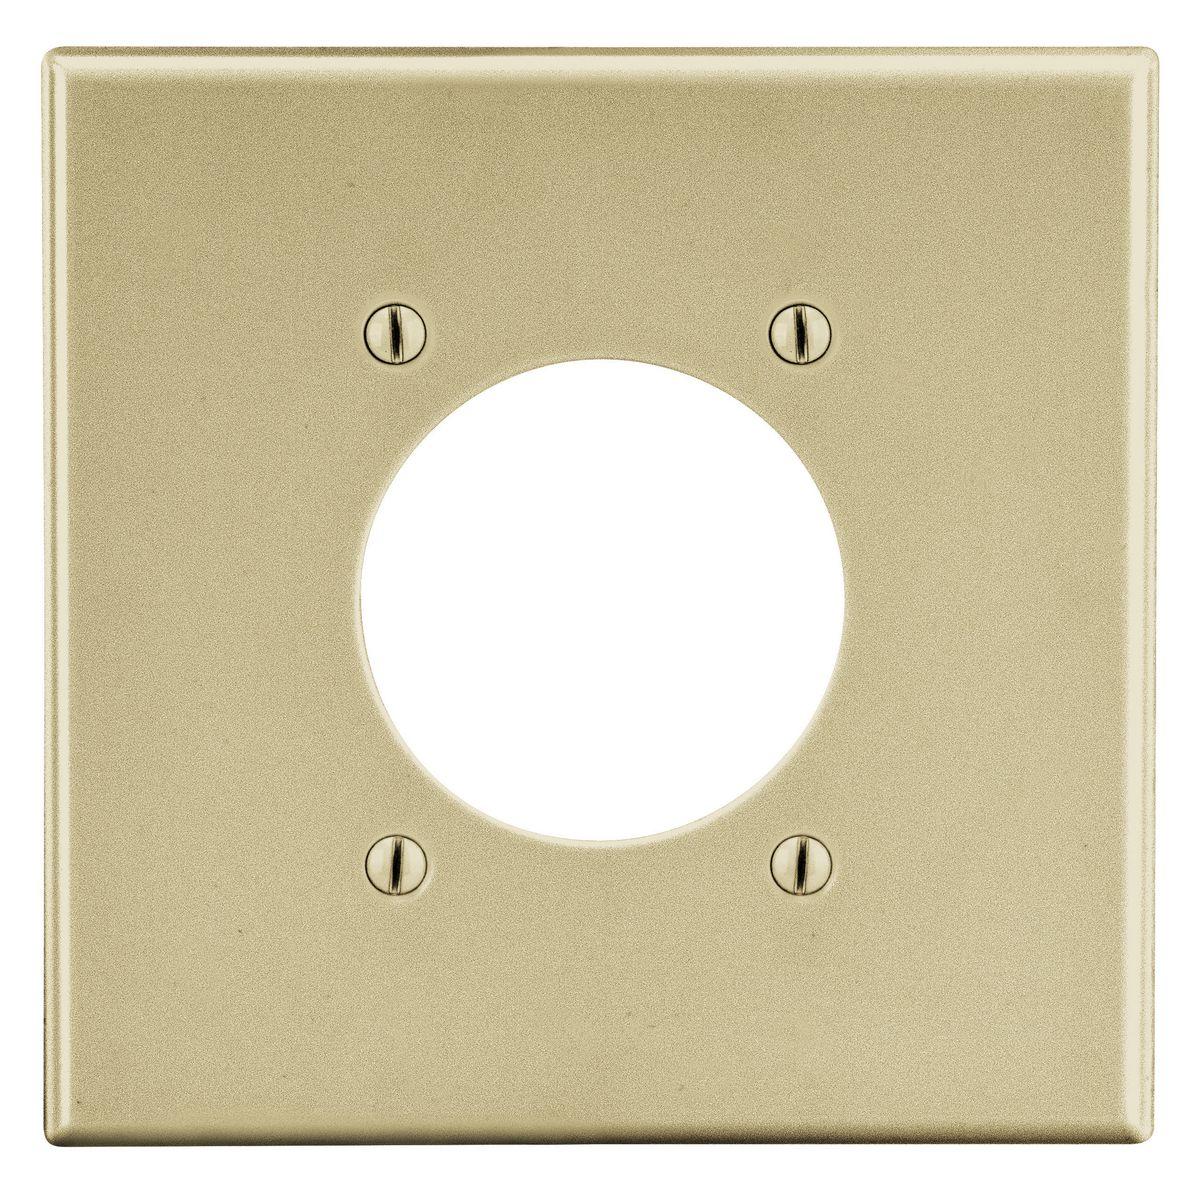 Hubbell PJ703I Wallplate,  Mid-Size 2-Gang, 2.15" Opening, Ivory  ; High-impact, self-extinguishing polycarbonate material ; More Rigid ; Sharp lines and less dimpling ; Smooth satin finish ; Blends into wall with an optimum finish ; Smooth Satin Finish